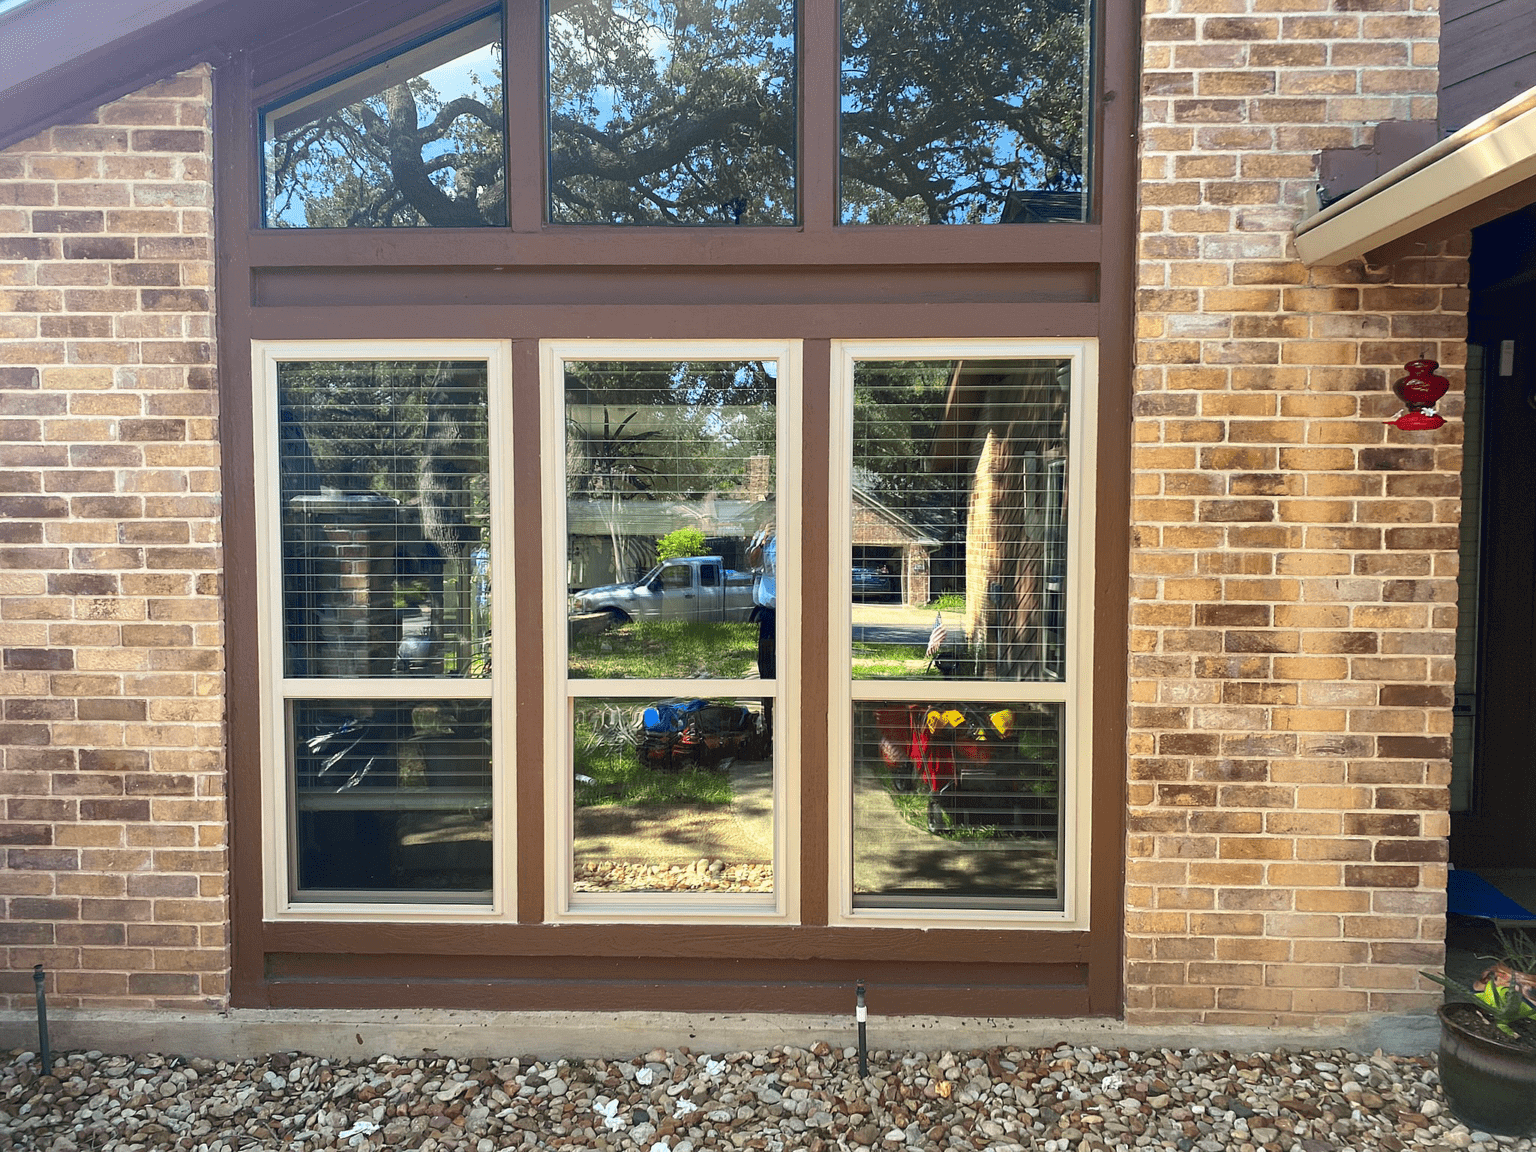 Stylish large window installation in a brick home, enhancing curb appeal in San Antonio, Texas